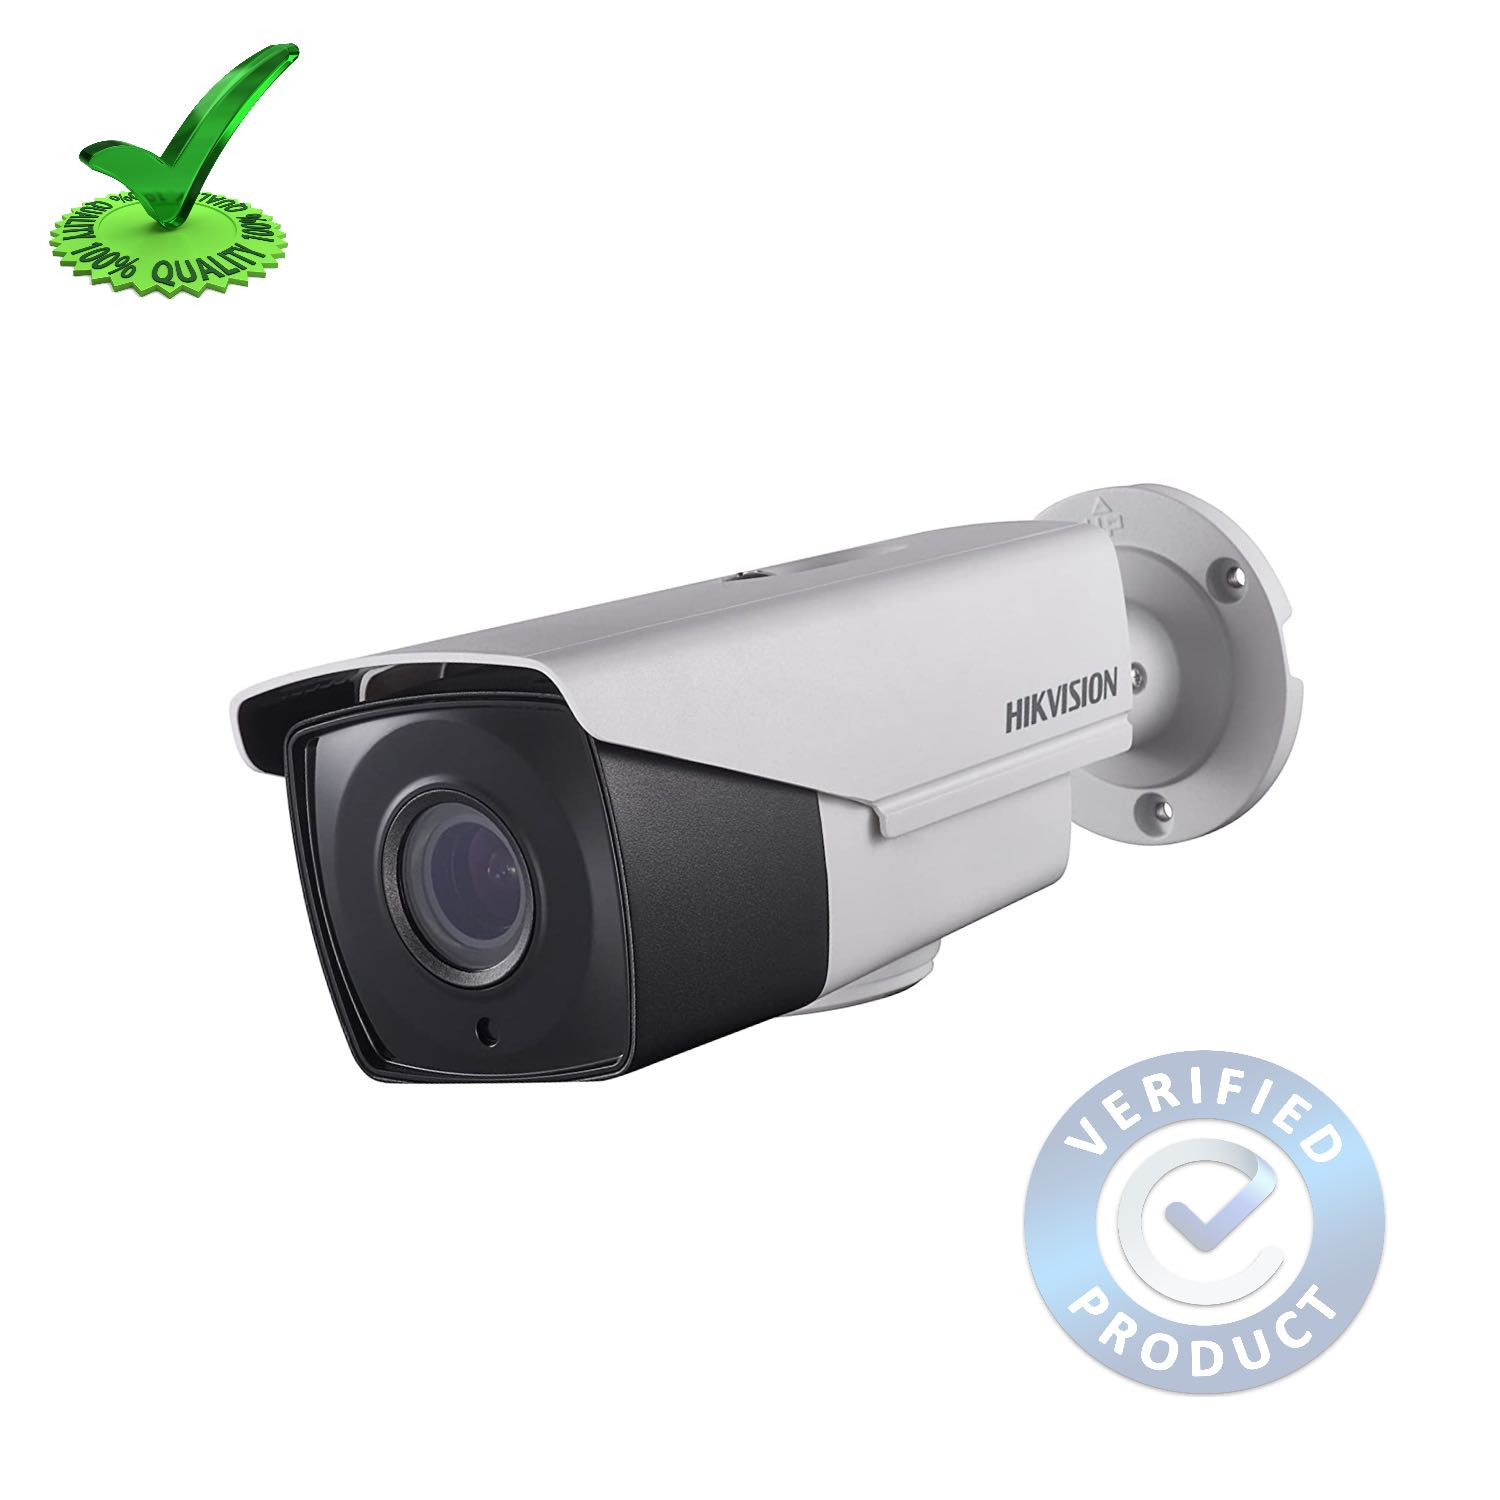 Hikvision DS-2CE1AC0T-IT5F 1MP HD Bullet Camera